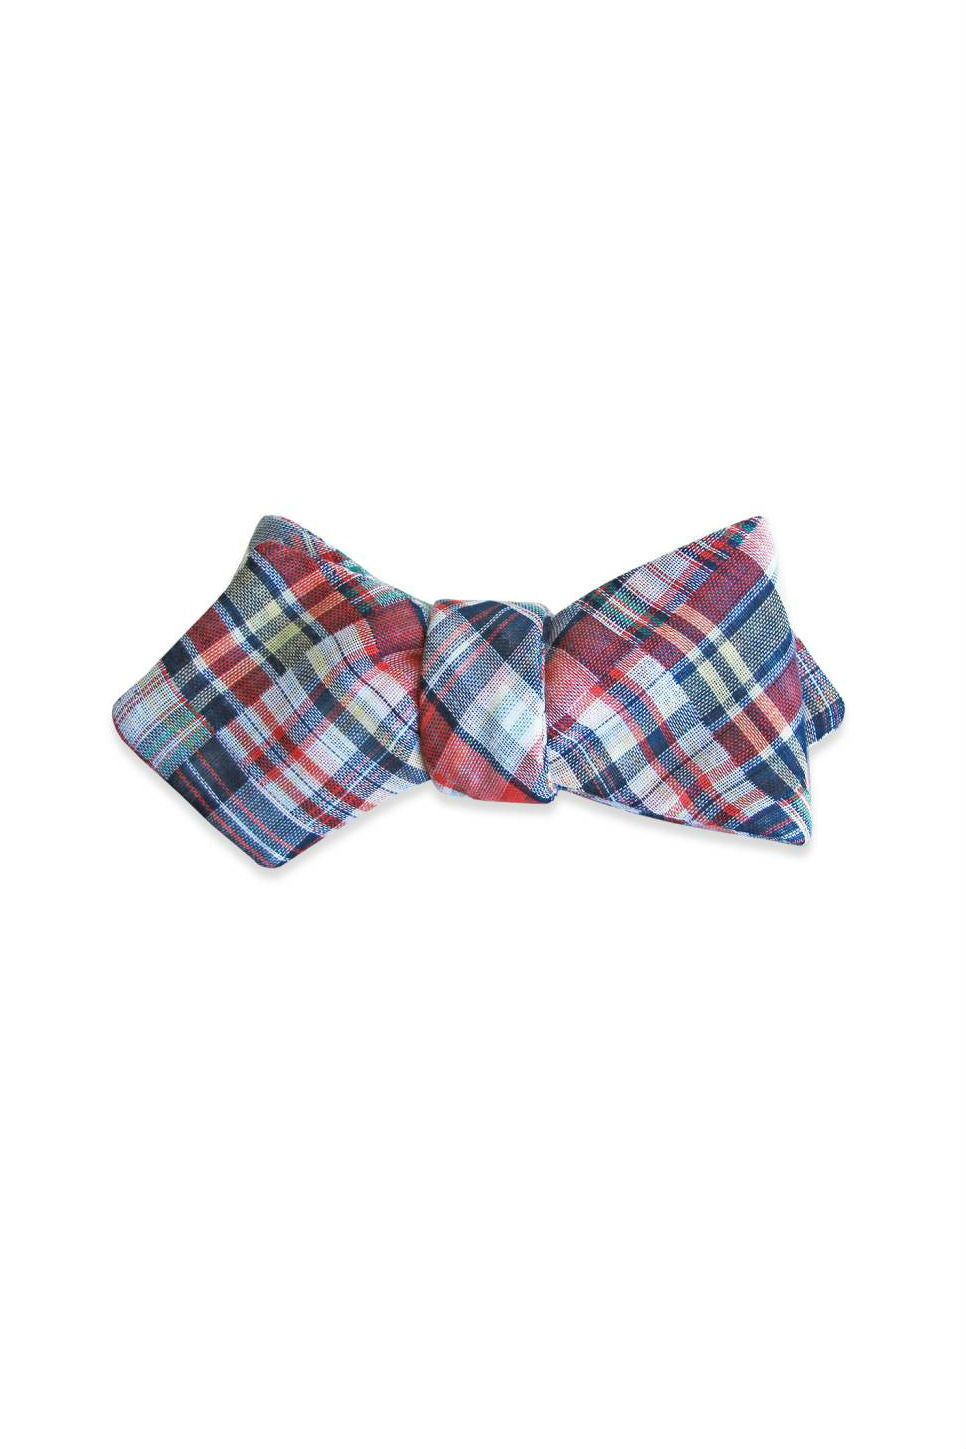 THE MADRAS BOW TIE Blue/Red